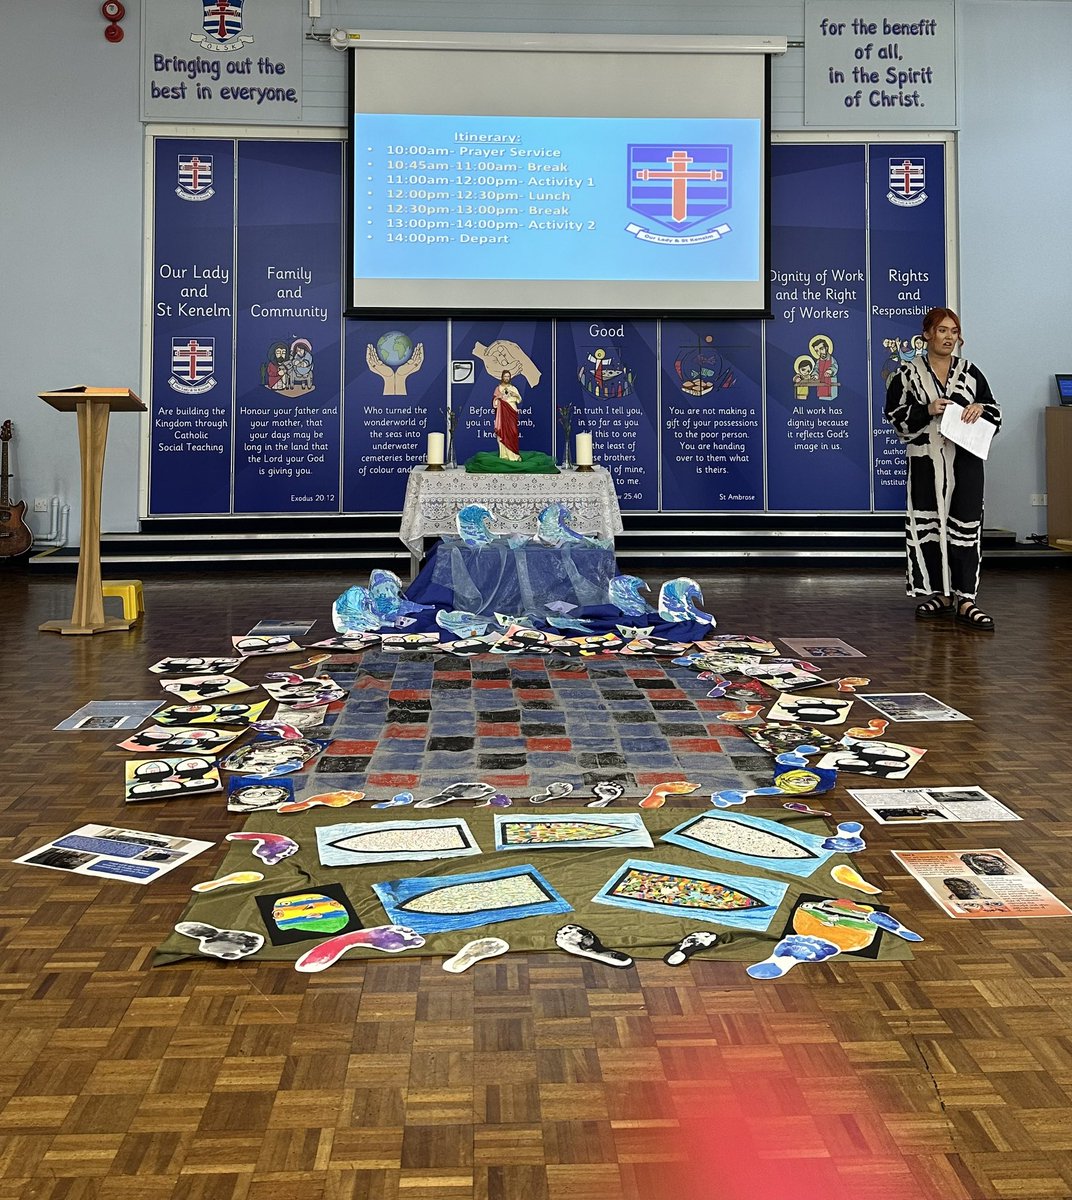 How wonderful to be sharing reflection time in @OLSK_ with pupils and staff from several schools. Focusing on our fabulous #BTK work and discussing #CST @SrJudithRussi @EducareMUK